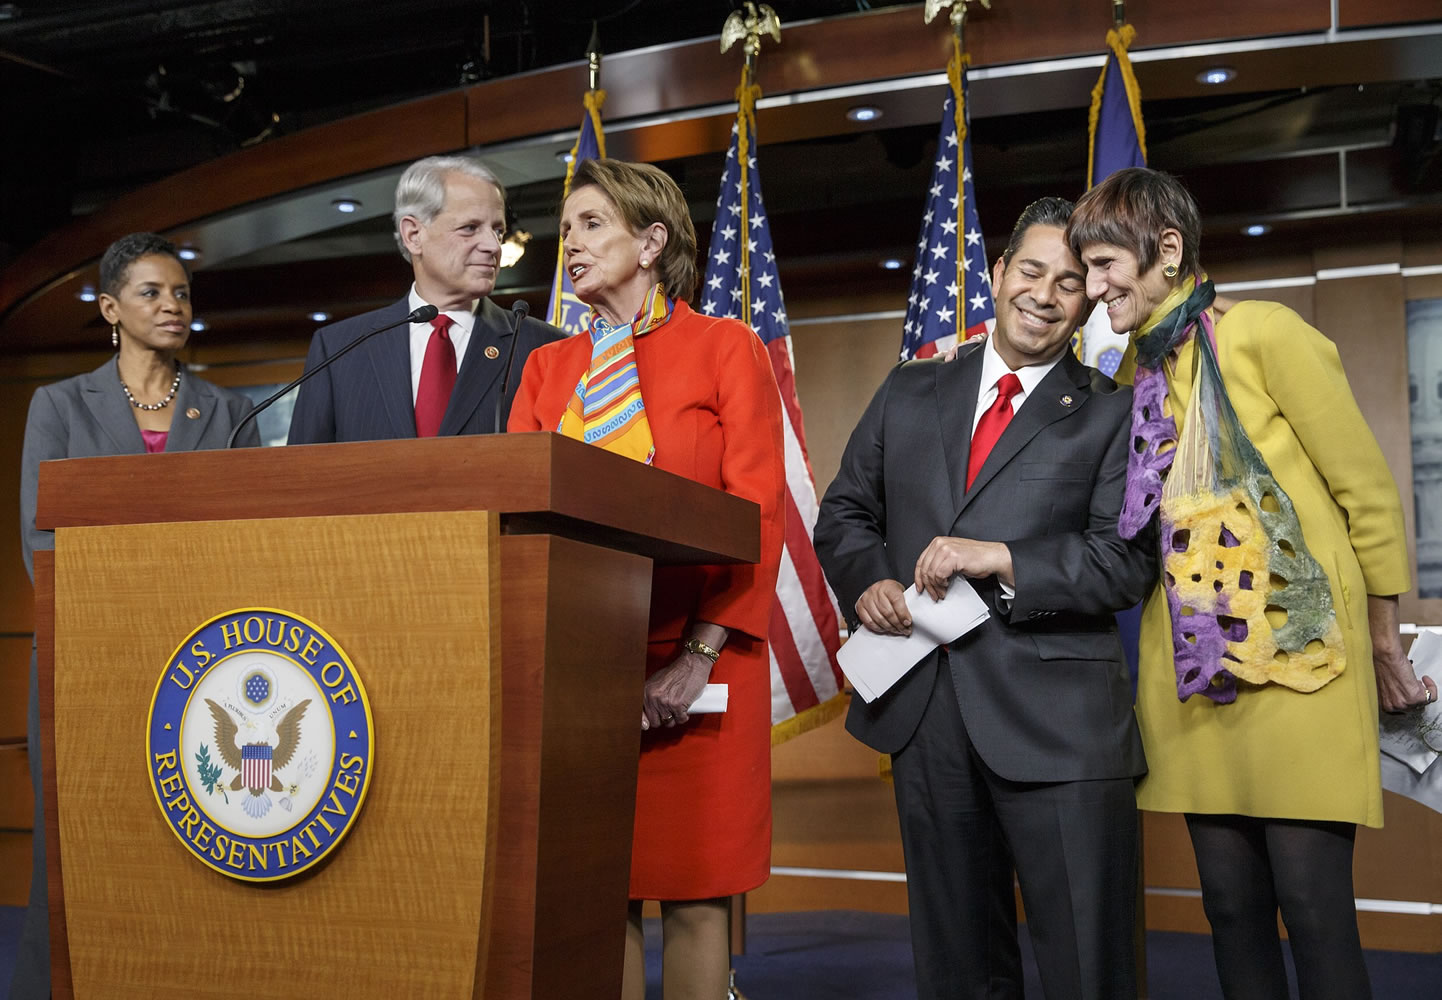 House Minority Leader Nancy Pelosi, D-Calif., center, announces her choice of Rep. Ben Ray Lujan, D-N.M., second from right, to take over as head of the Democratic Congressional Campaign Committee from Rep. Steve Israel, D-N.Y., second from left, during a news conference at the Capitol in Washington on Monday. Rep. Donna Edwards, D-Md., far left, just elected to a fourth term, will become co-chair of the House Democrats? Steering and Policy Committee with Rep. Rosa DeLauro, D-Conn., far right, who congratulates Lujan.